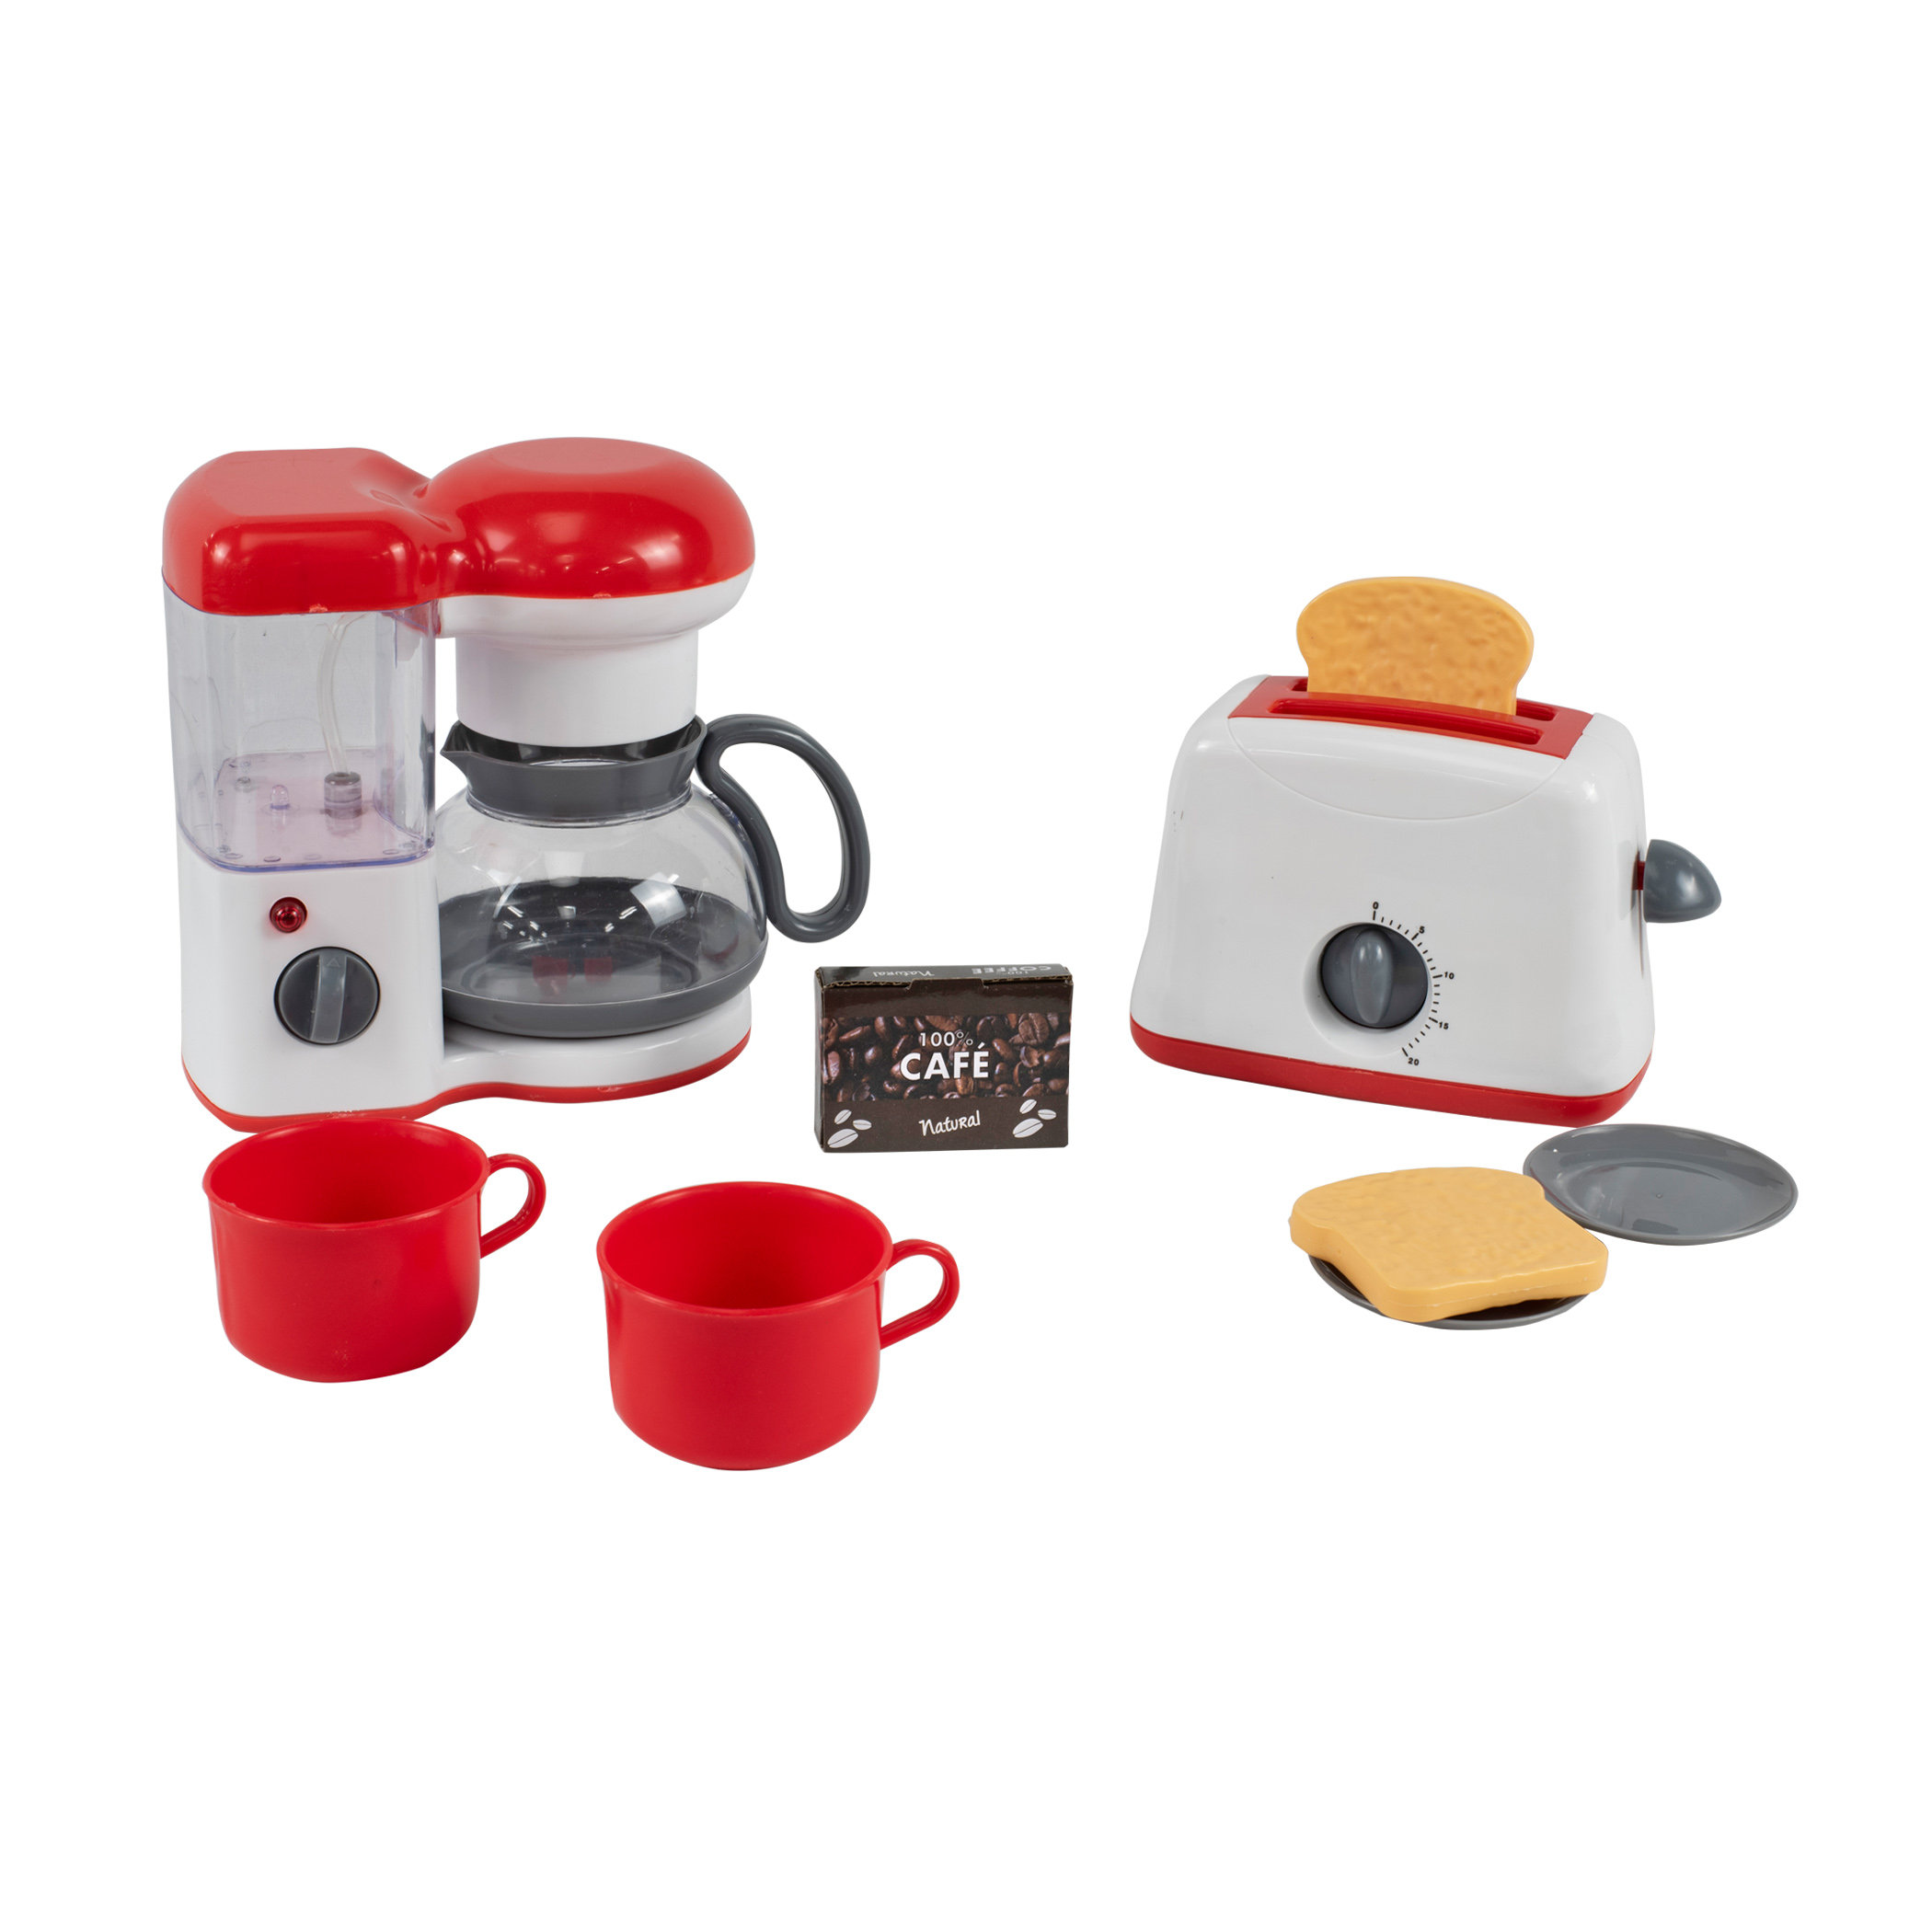 Dollar Queen Deluxe Kitchen Play Coffee Maker and Toaster